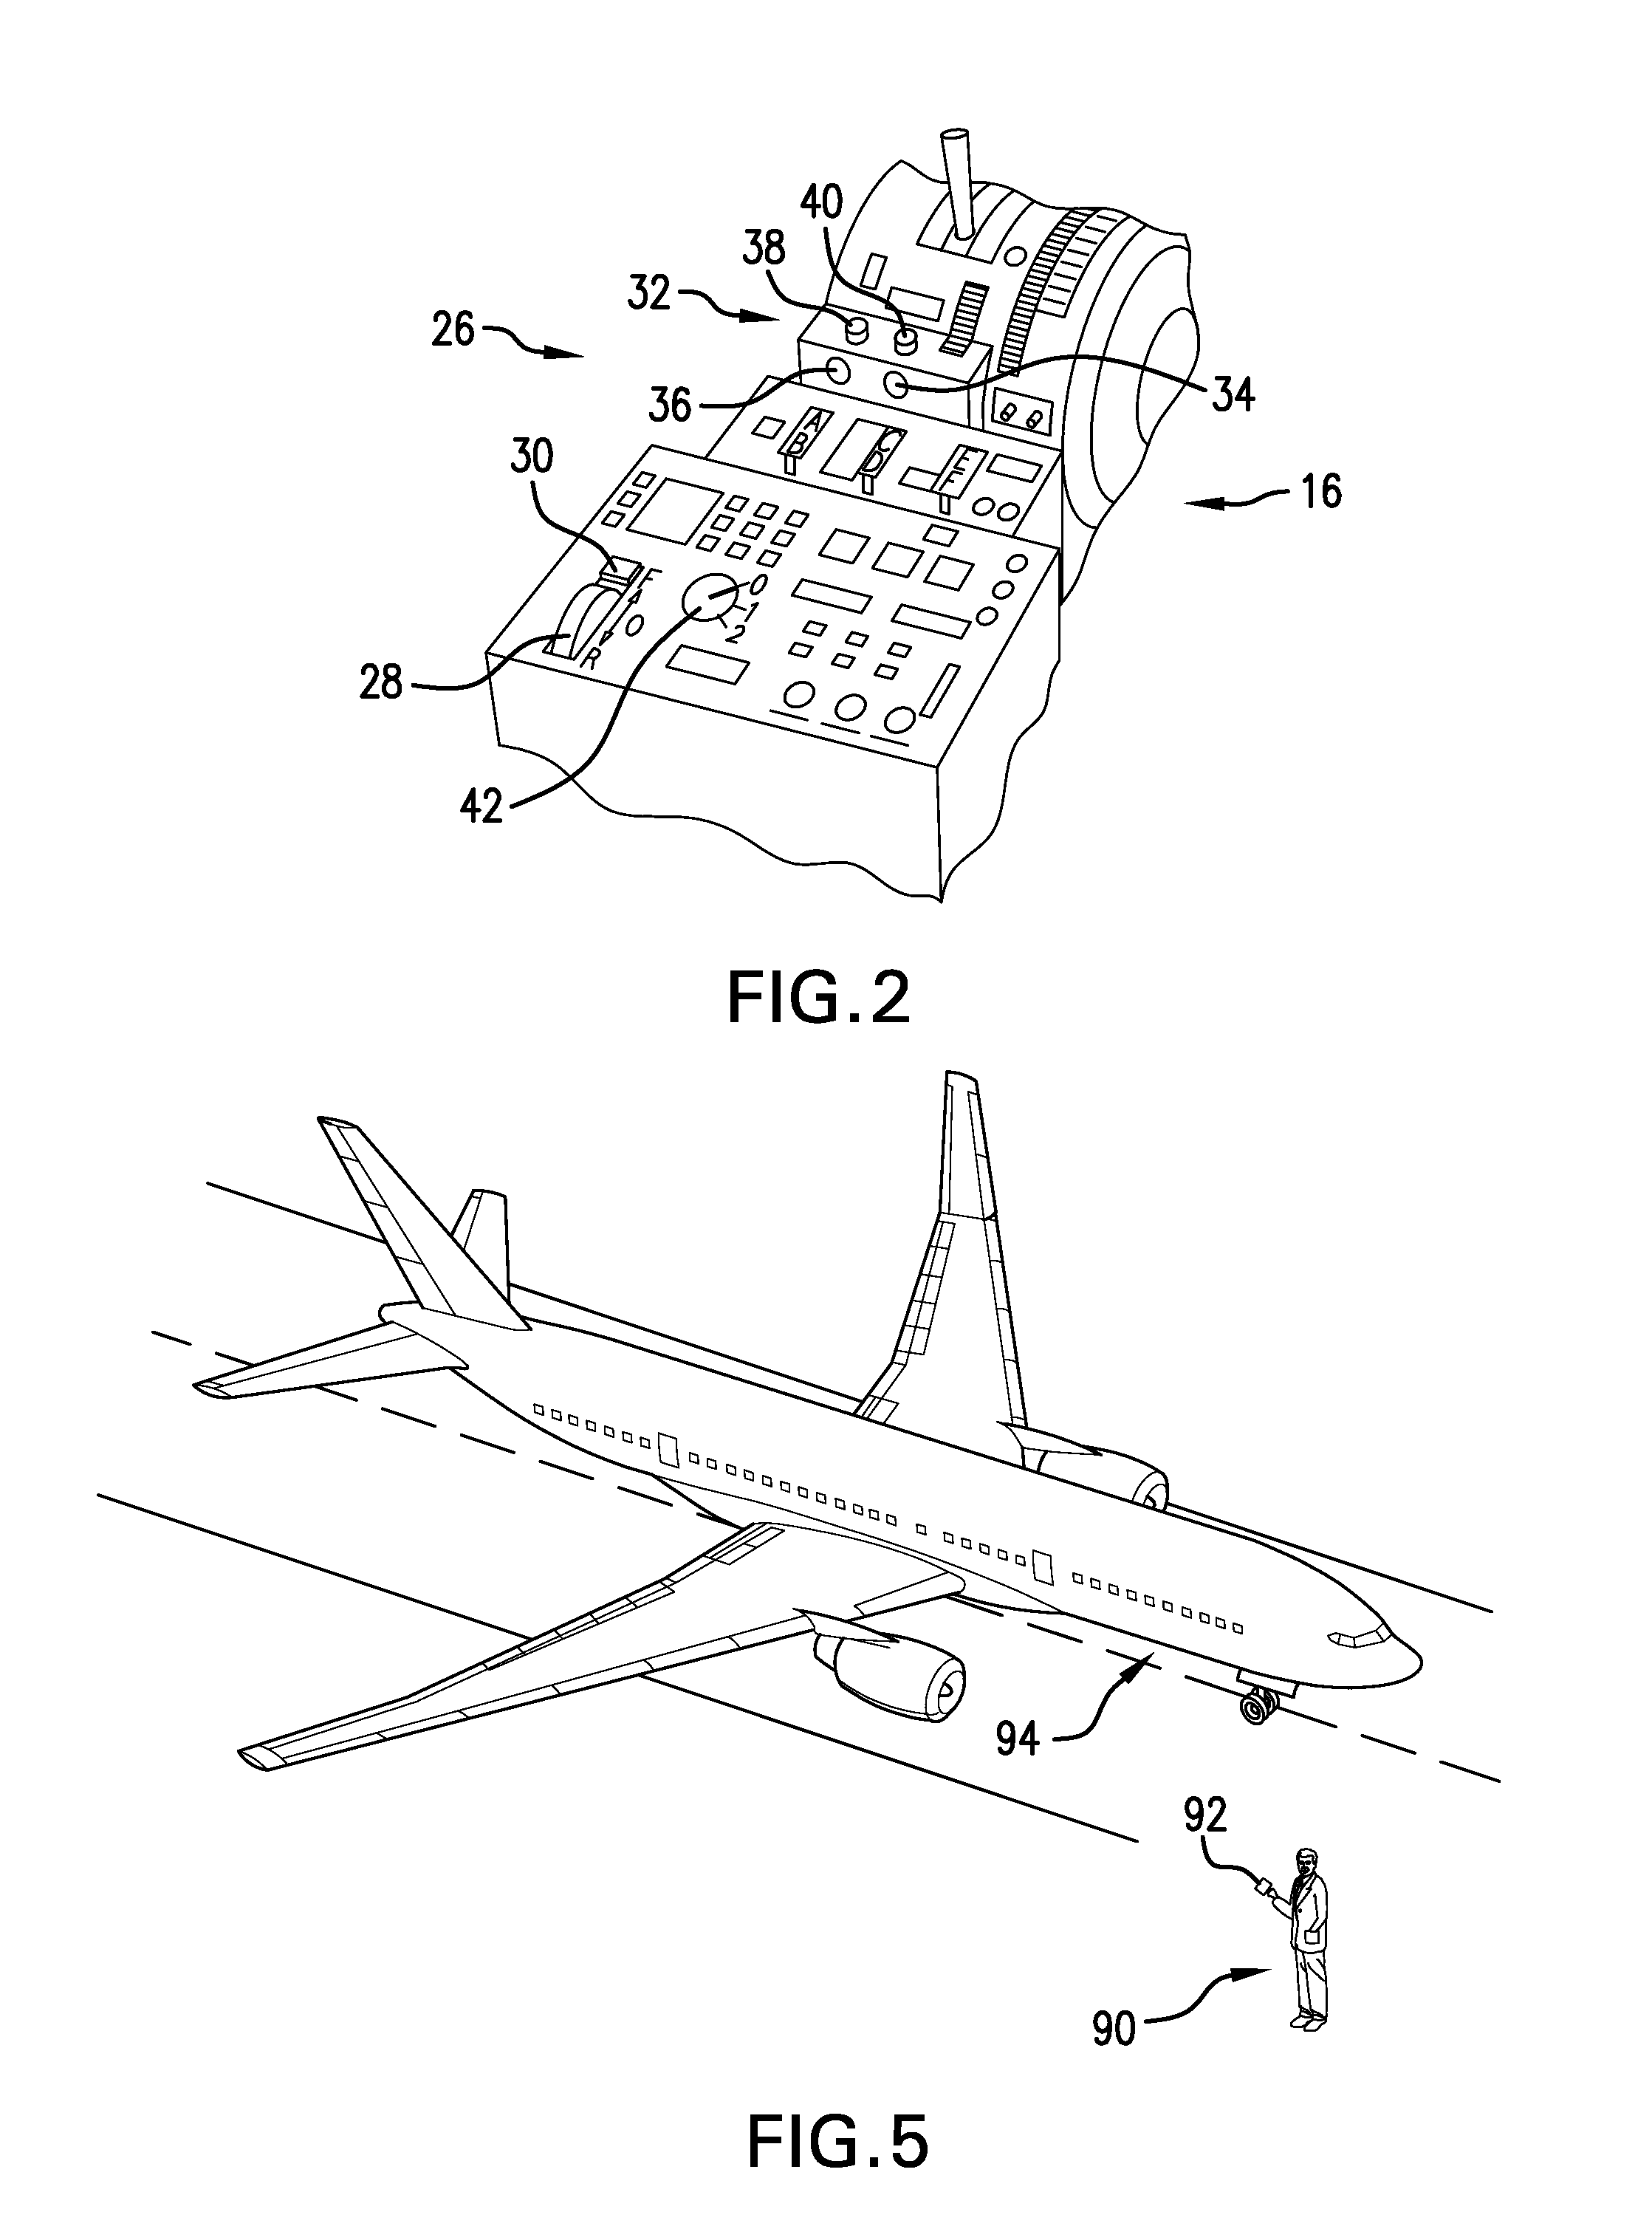 Integrated aircraft ground navigation control system